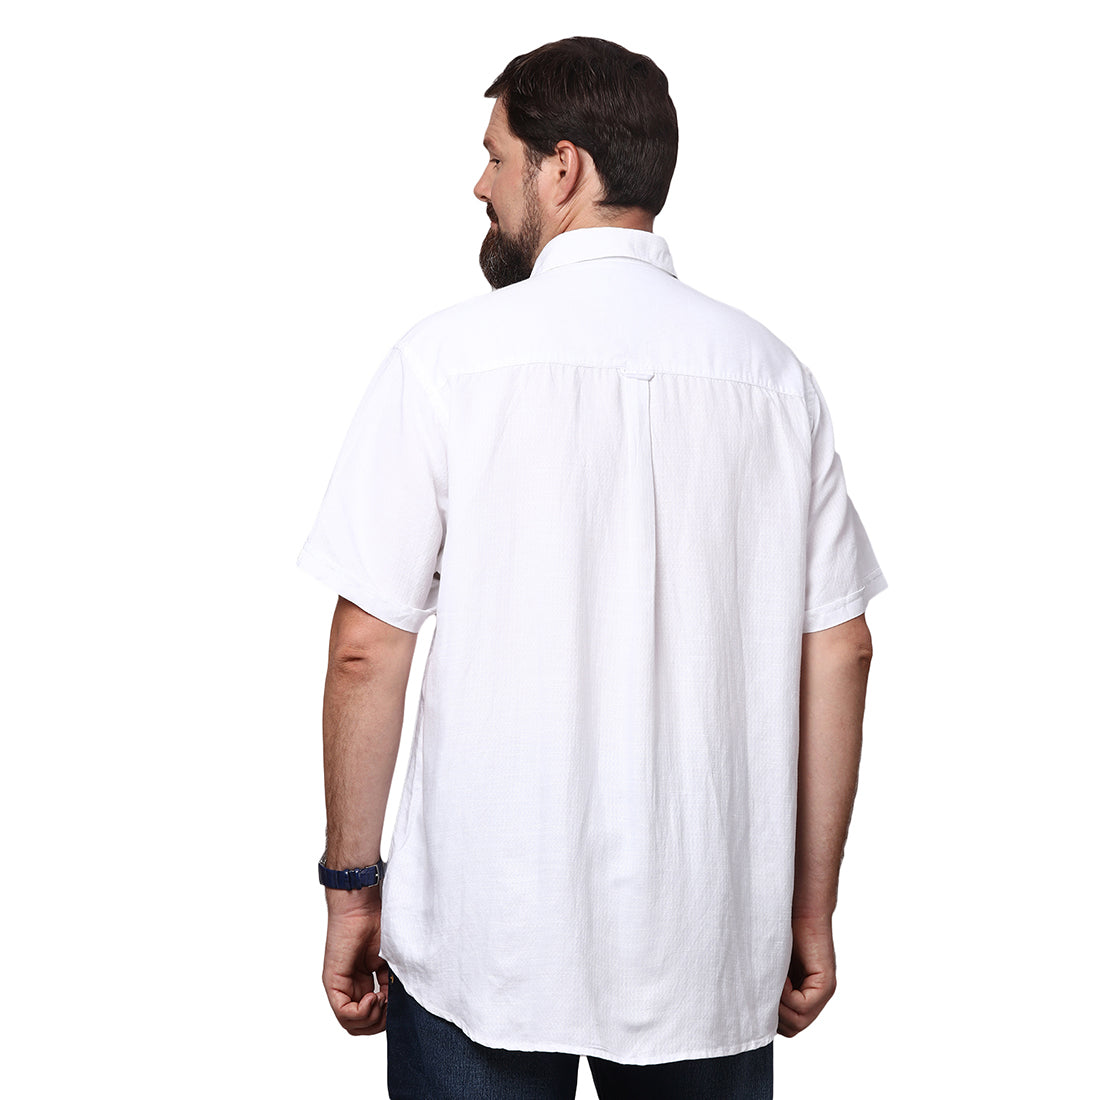 Big & Bold Solid White Half Sleeves Slim Fit Casual Shirts (Plus Size) - Double Two